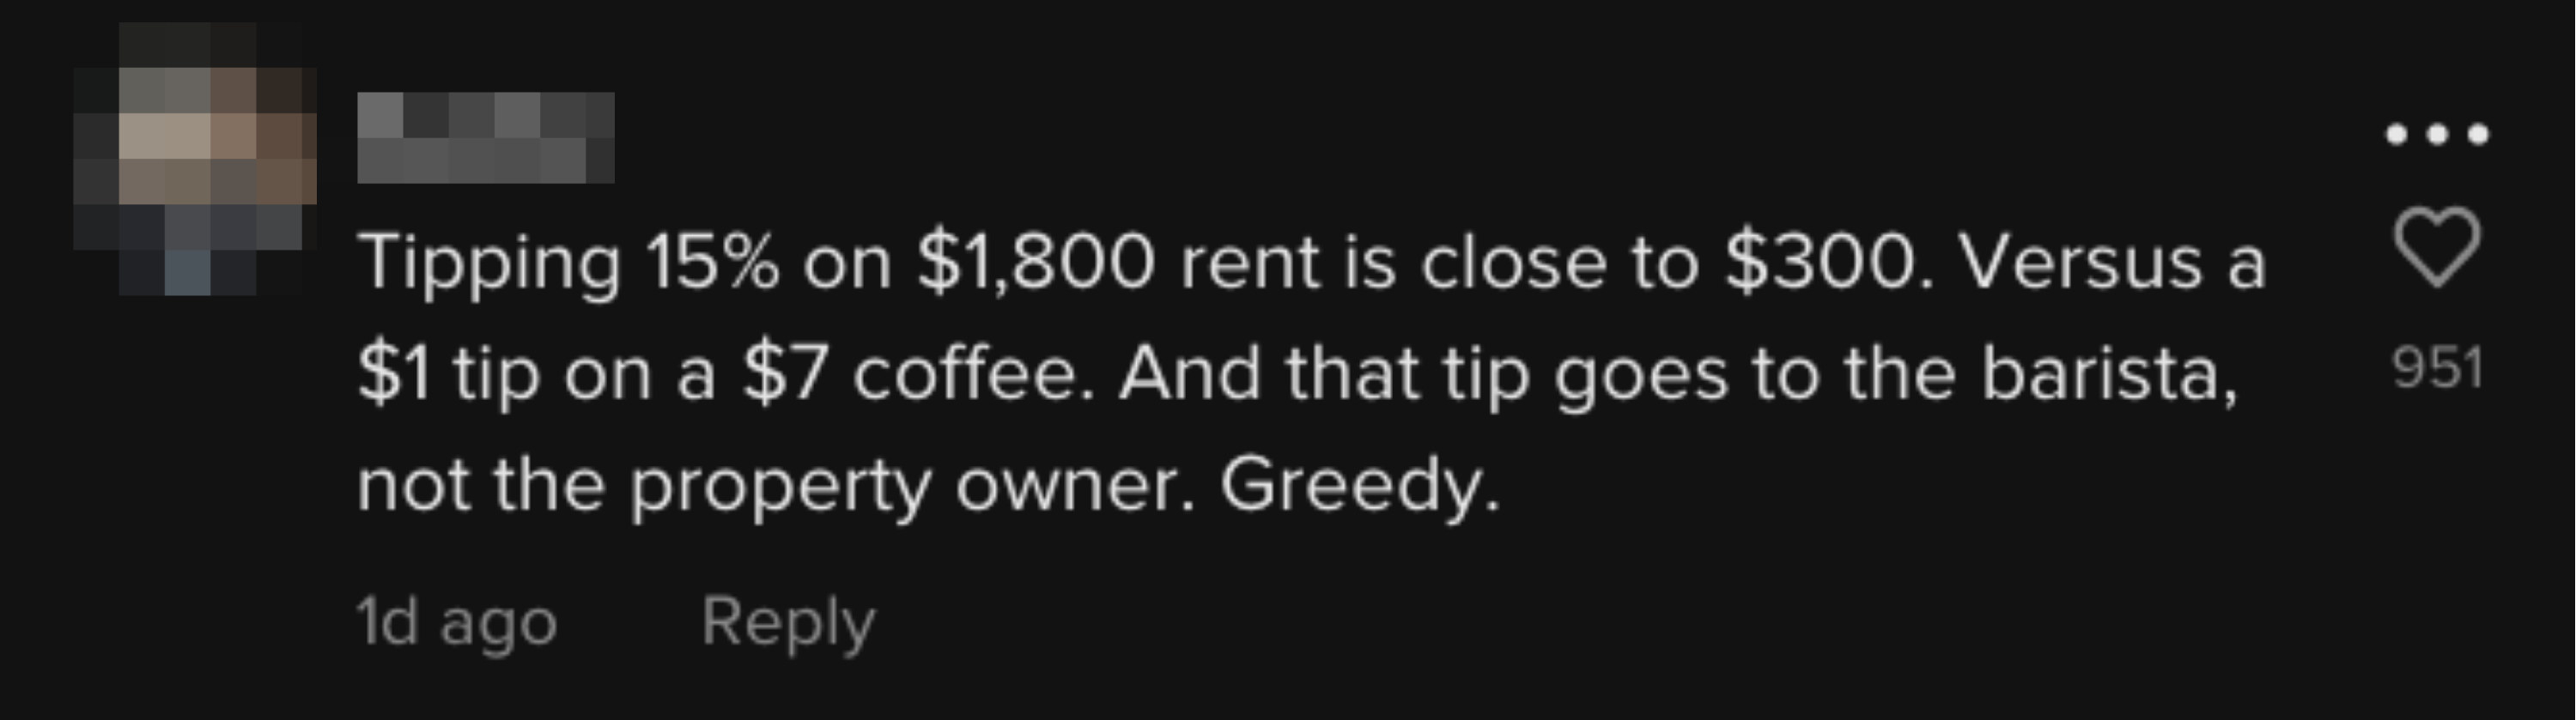 Tipping 15% on $1,8000 rent is close to $300. Versus a $1 tip on a $7 coffee. And that tip goes to the barista not the property owner. Greedy.